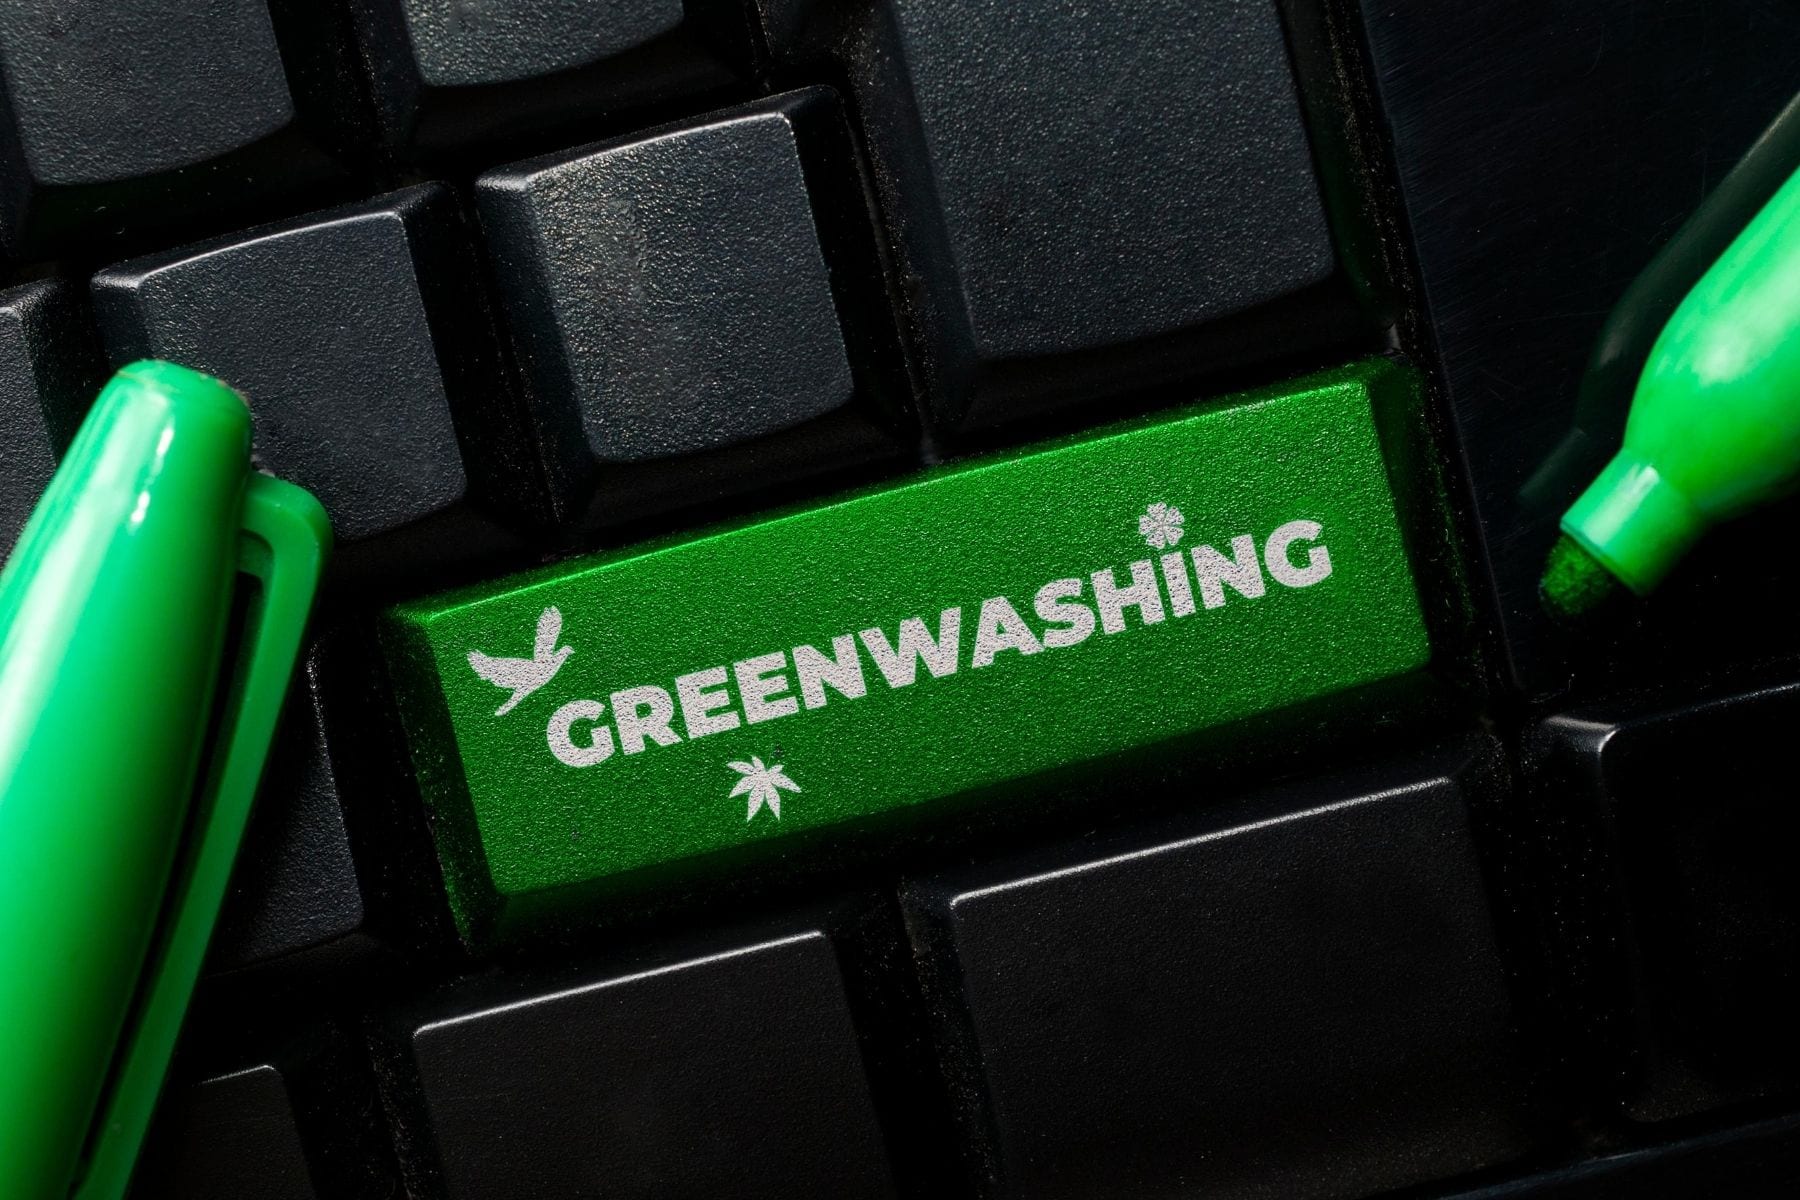 Green key on a black keyboard says ‘greenwashing.’ The key is surrounded by green markers